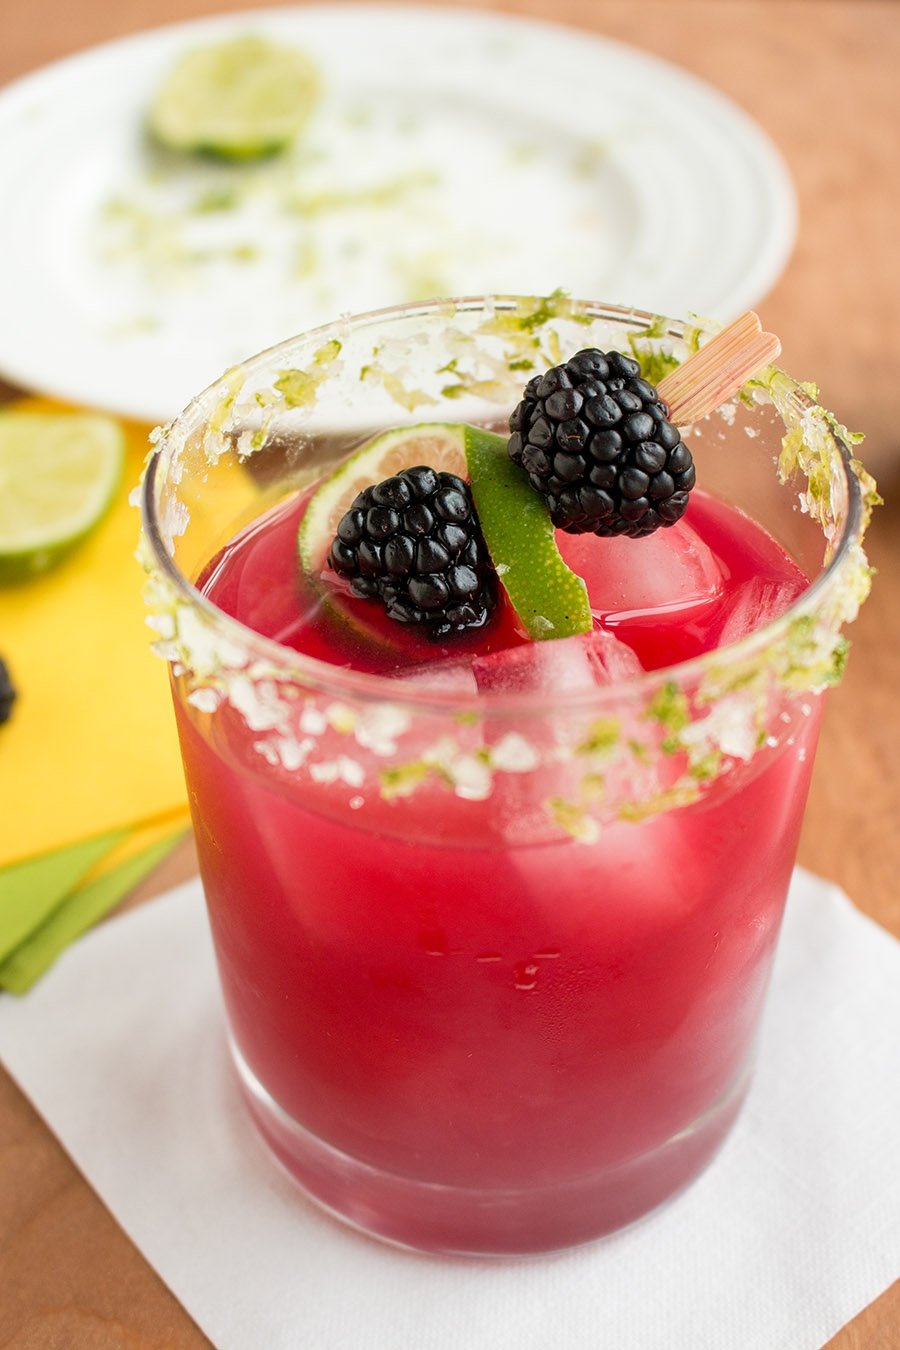 Spicy Blackberry Habanero Margarita made at home and served